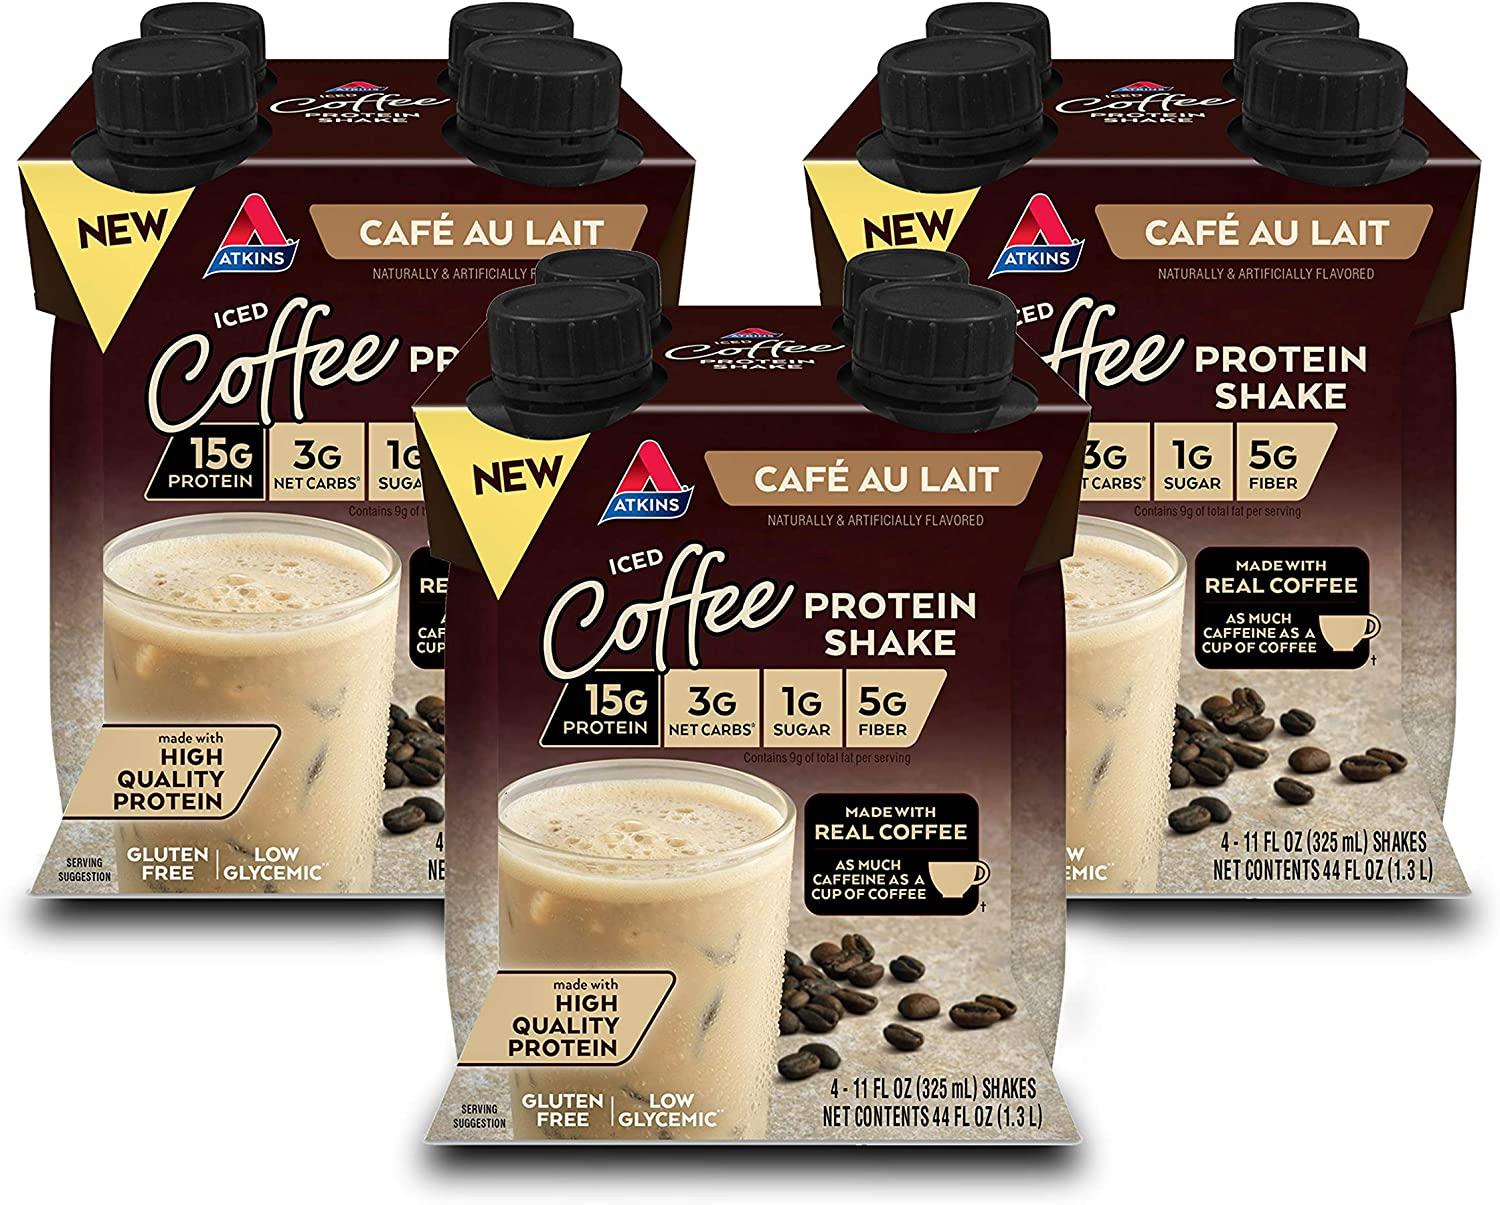 Atkins Iced Coffee Cafe au Lait Protein Shake for $10.77 Shipped